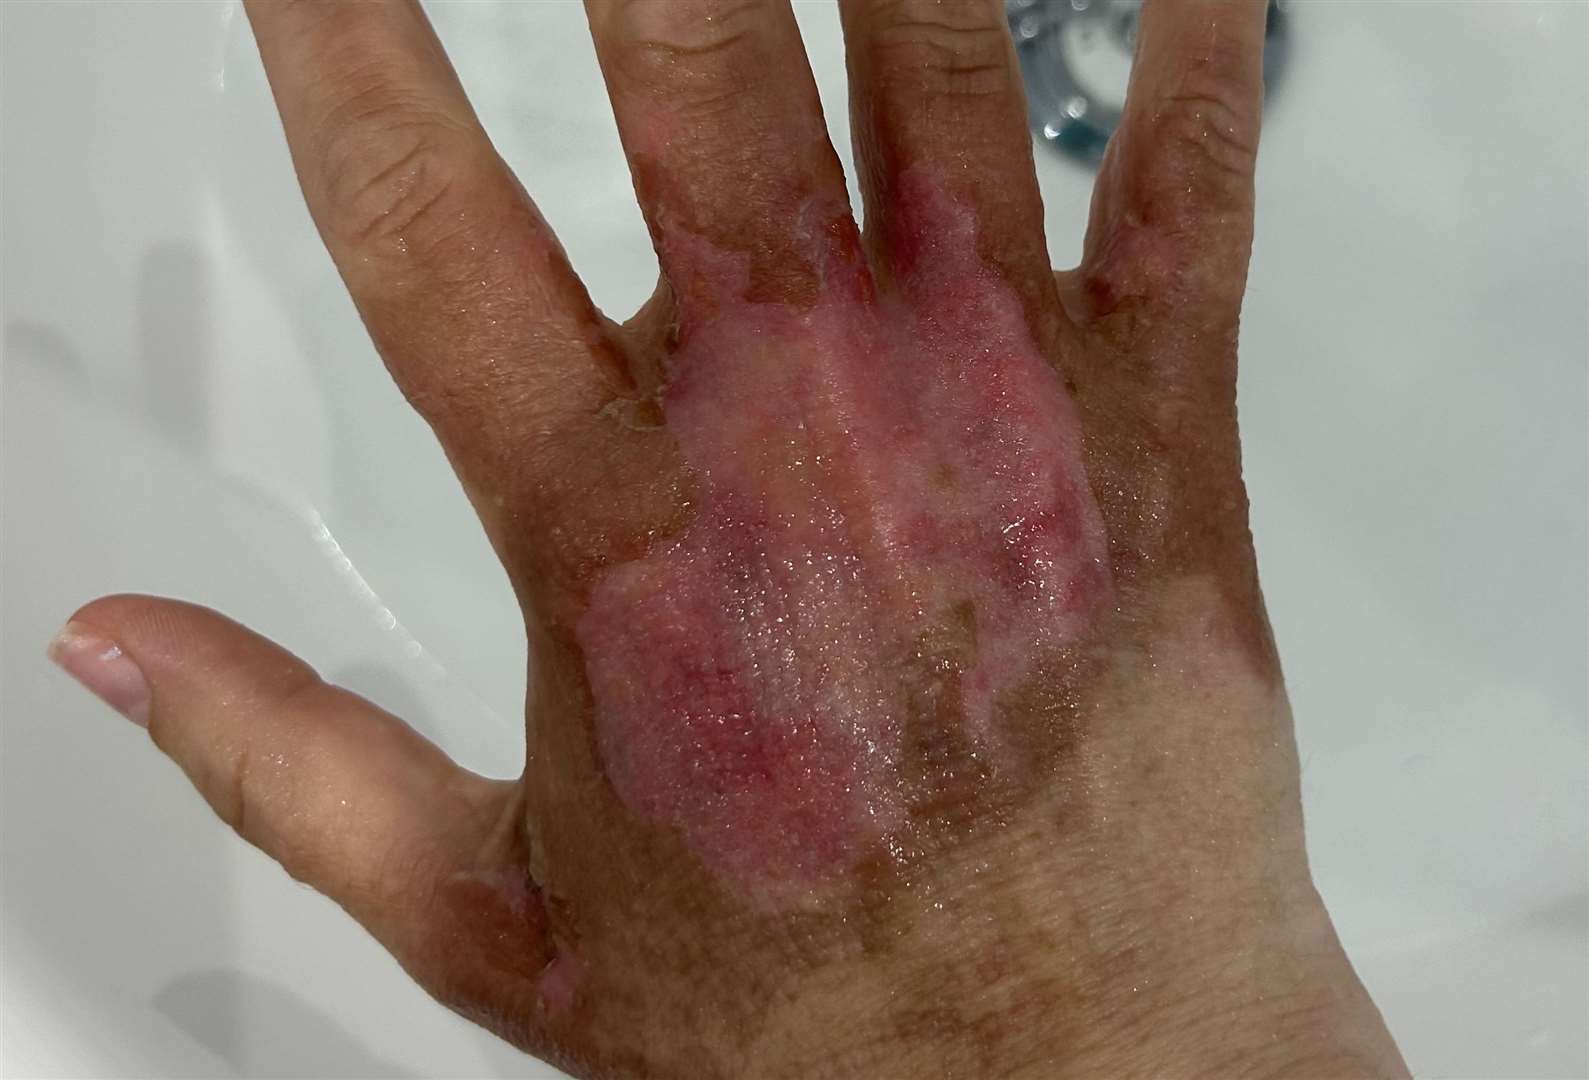 Lucy Jones had to have the blisters and skin scrapped off the top of her hand after getting a Hogsweed burn. Picture: Kennedy News